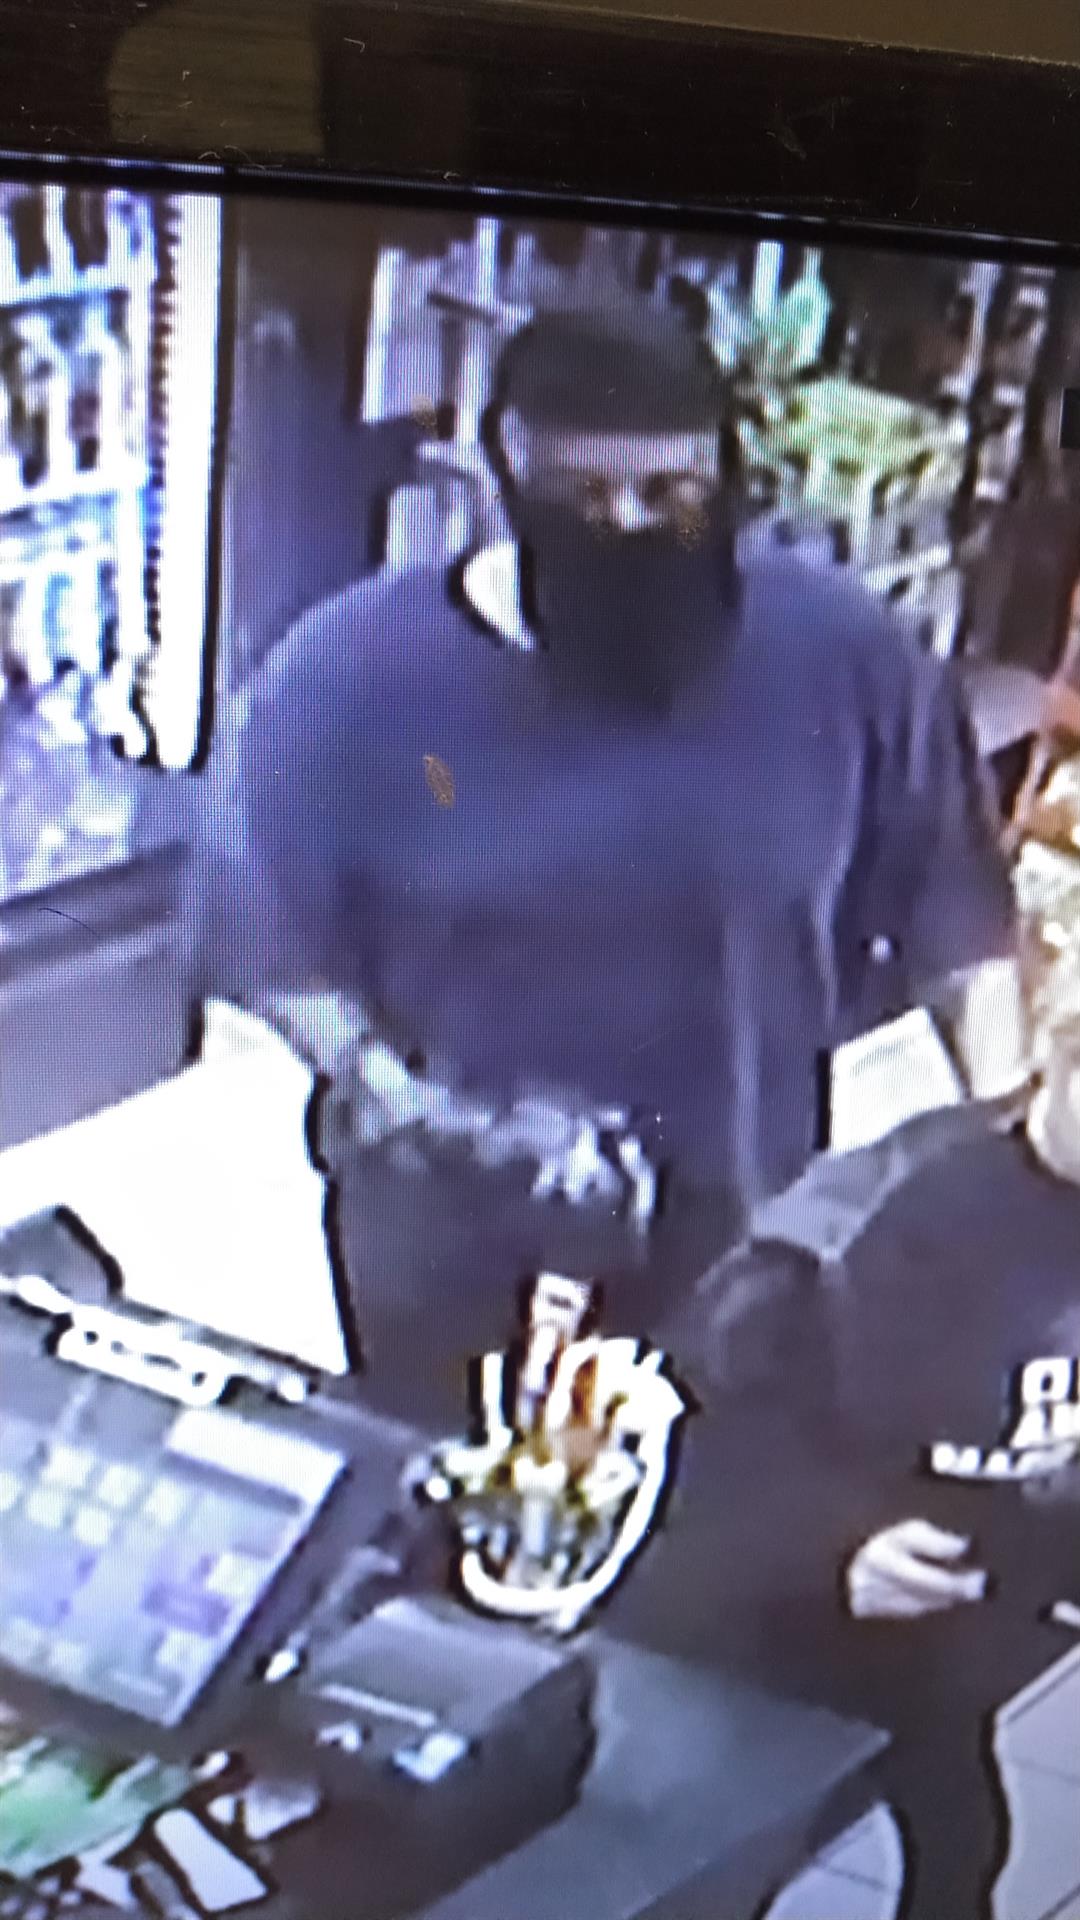 Police Looking for Suspect in Kwik Fill Robbery in North East